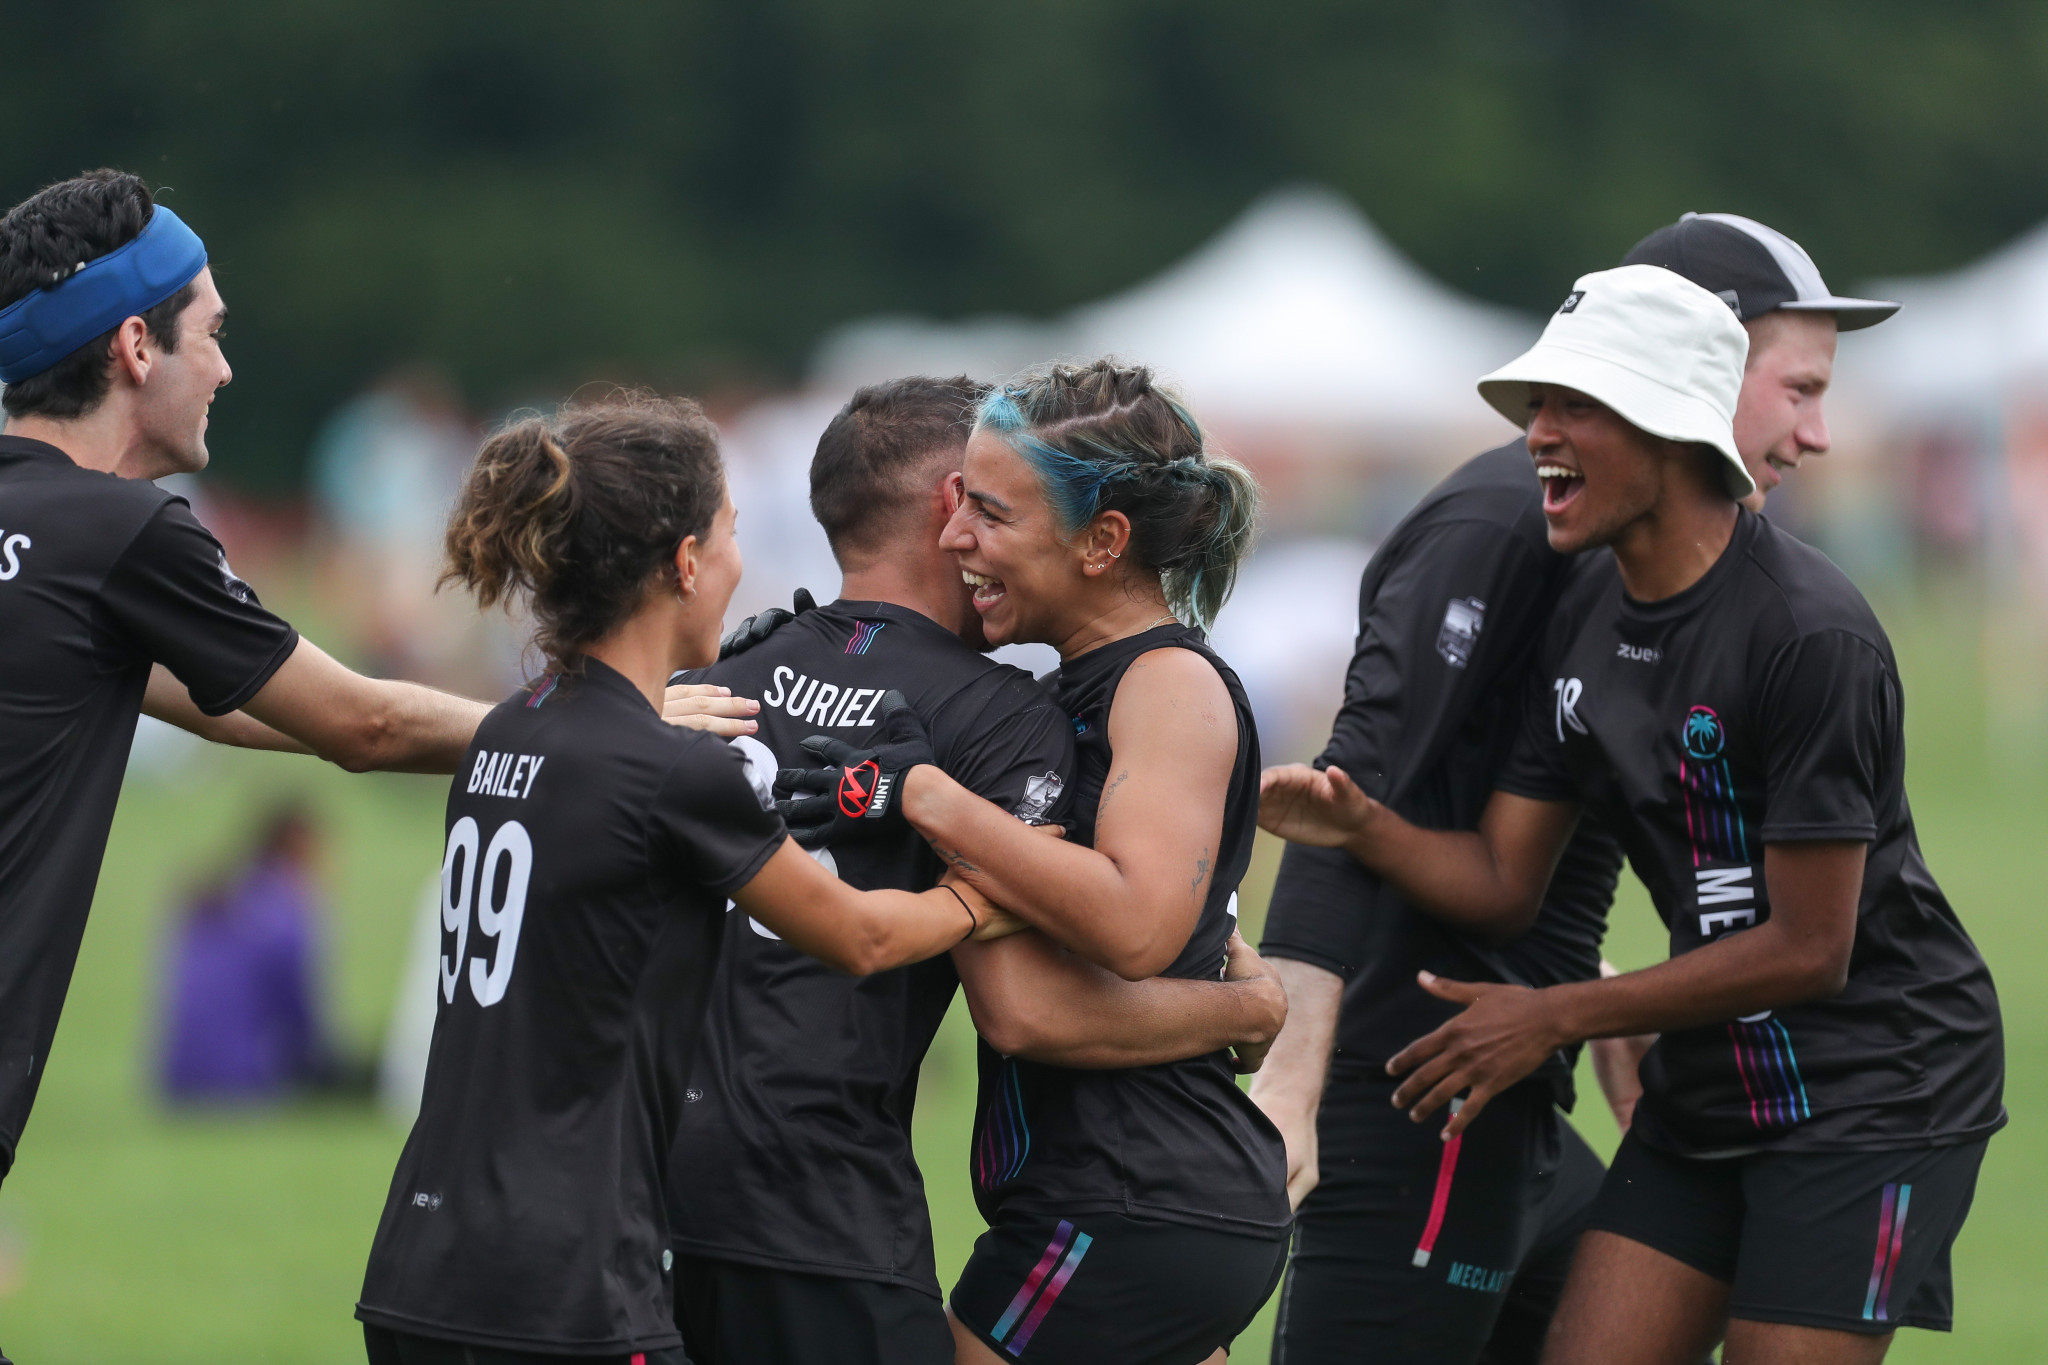 Meclao’ upset BFG to pip first seeds at World Ultimate Club Championships in Ohio